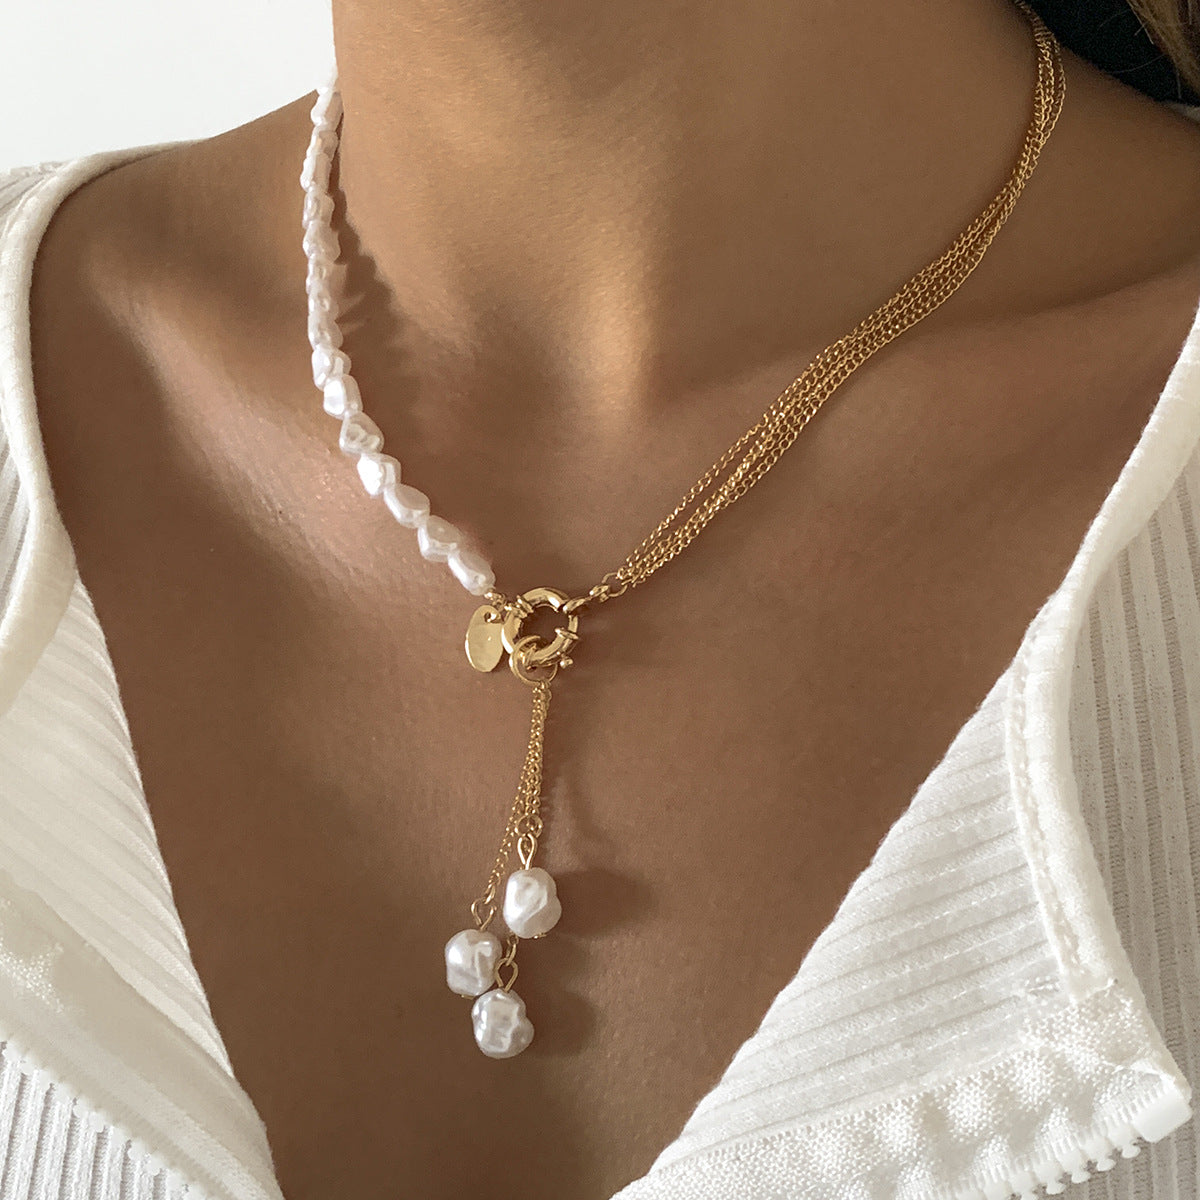 Metal Multilayered Chain Irregular Fashion Pearl Pendant Necklace